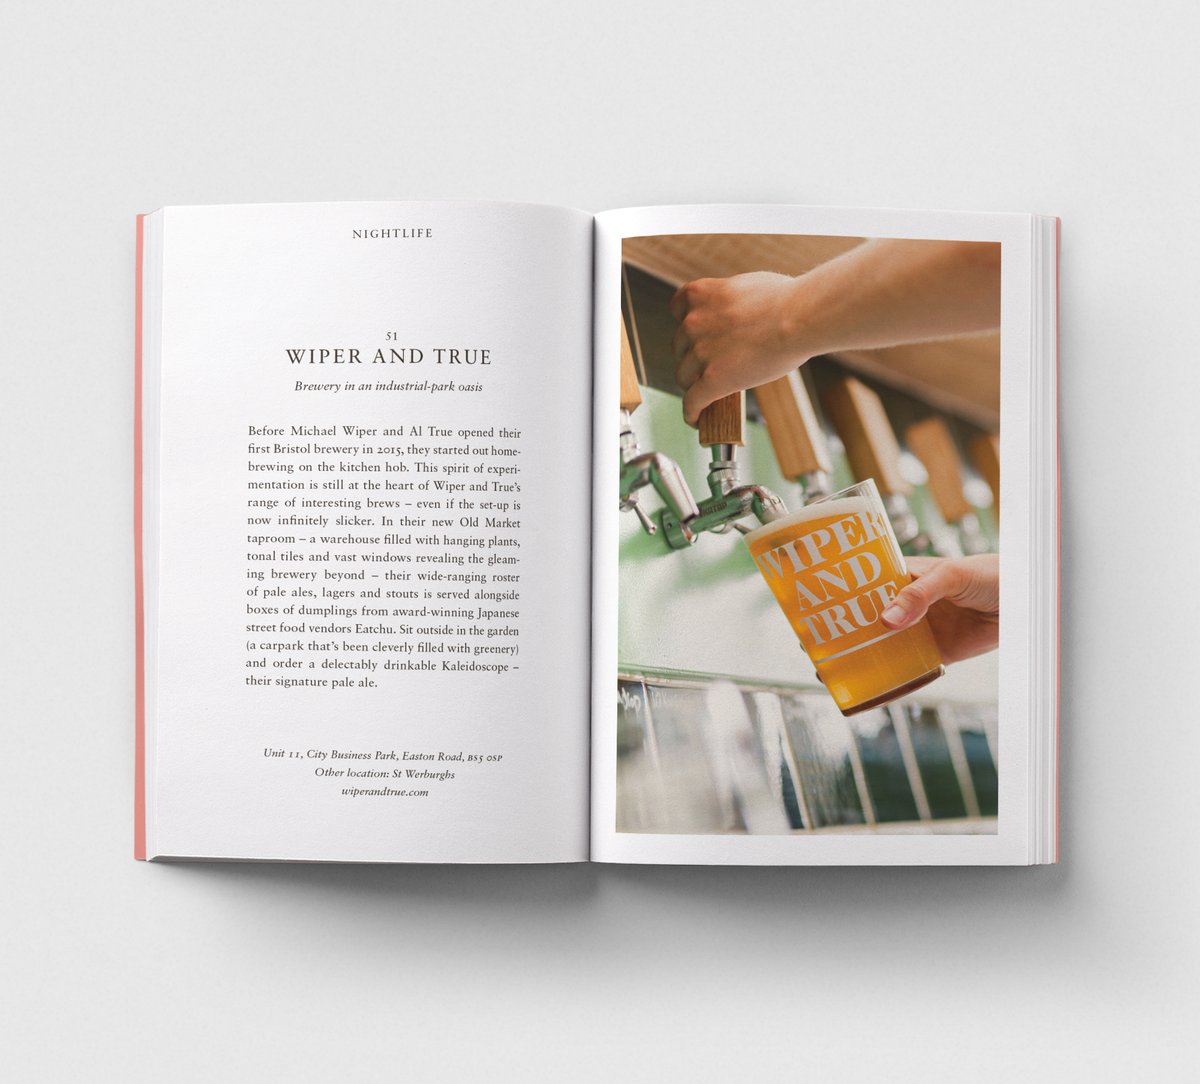 WIPER AND TRUE IN PRINT 🗞️ We're delighted to have @WiperAndTrueTap included in 'An Opinionated Guide to Bristol' published by @HoxtonMiniPress. The book includes 60 recommendations on where to spend ‘a perfect weekend.’ It's available to order now: hoxtonminipress.com/collections/bo…